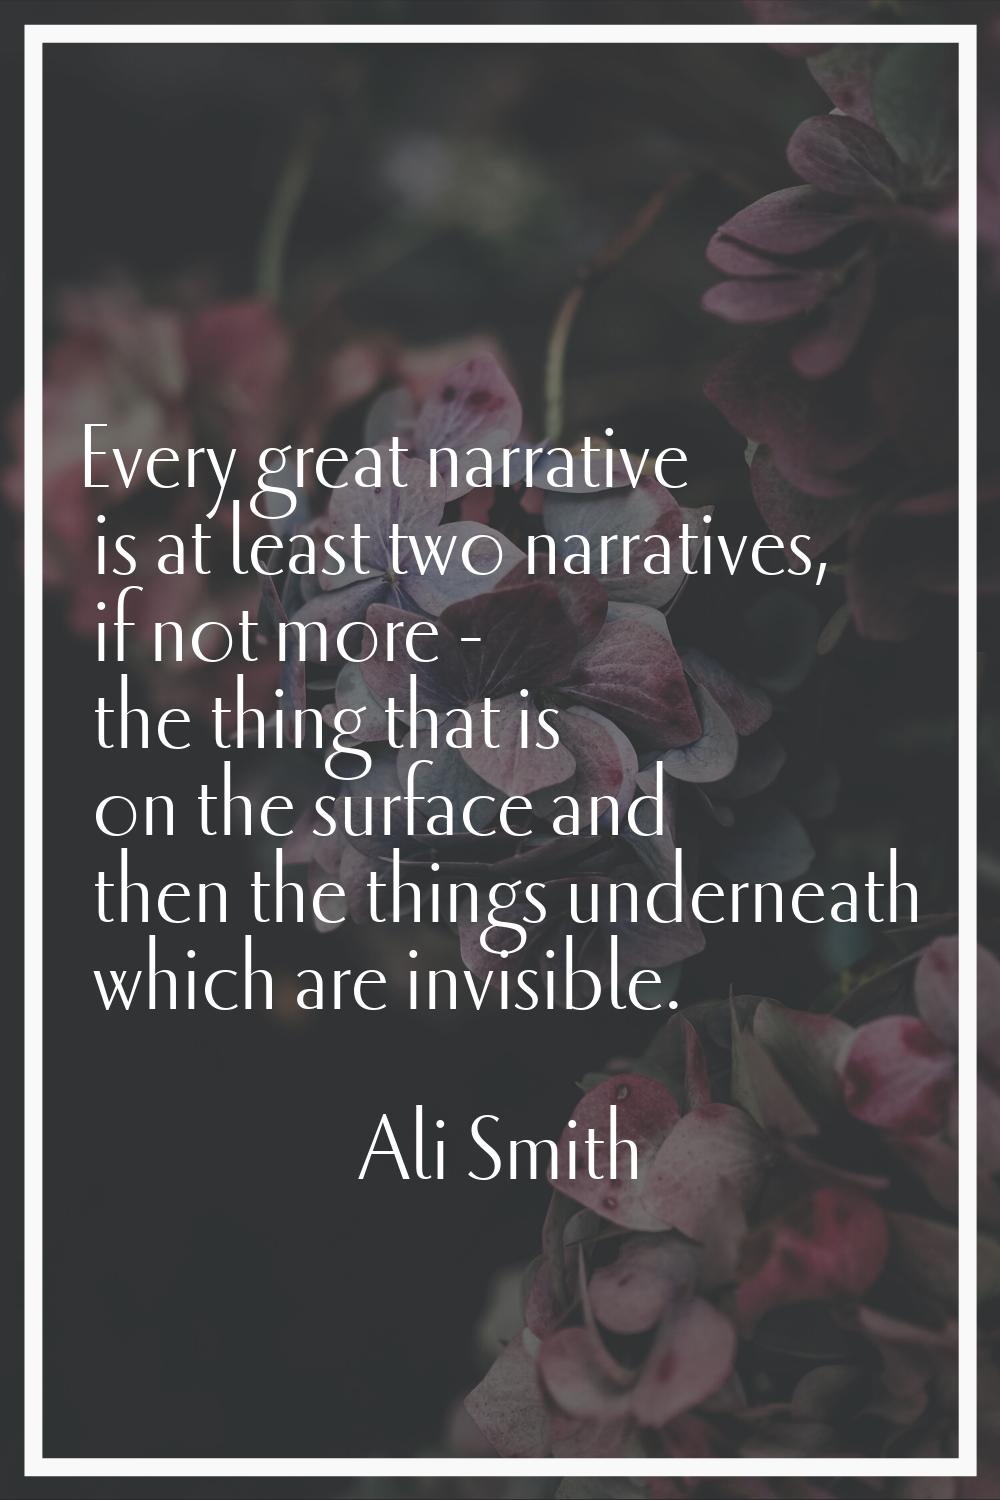 Every great narrative is at least two narratives, if not more - the thing that is on the surface an